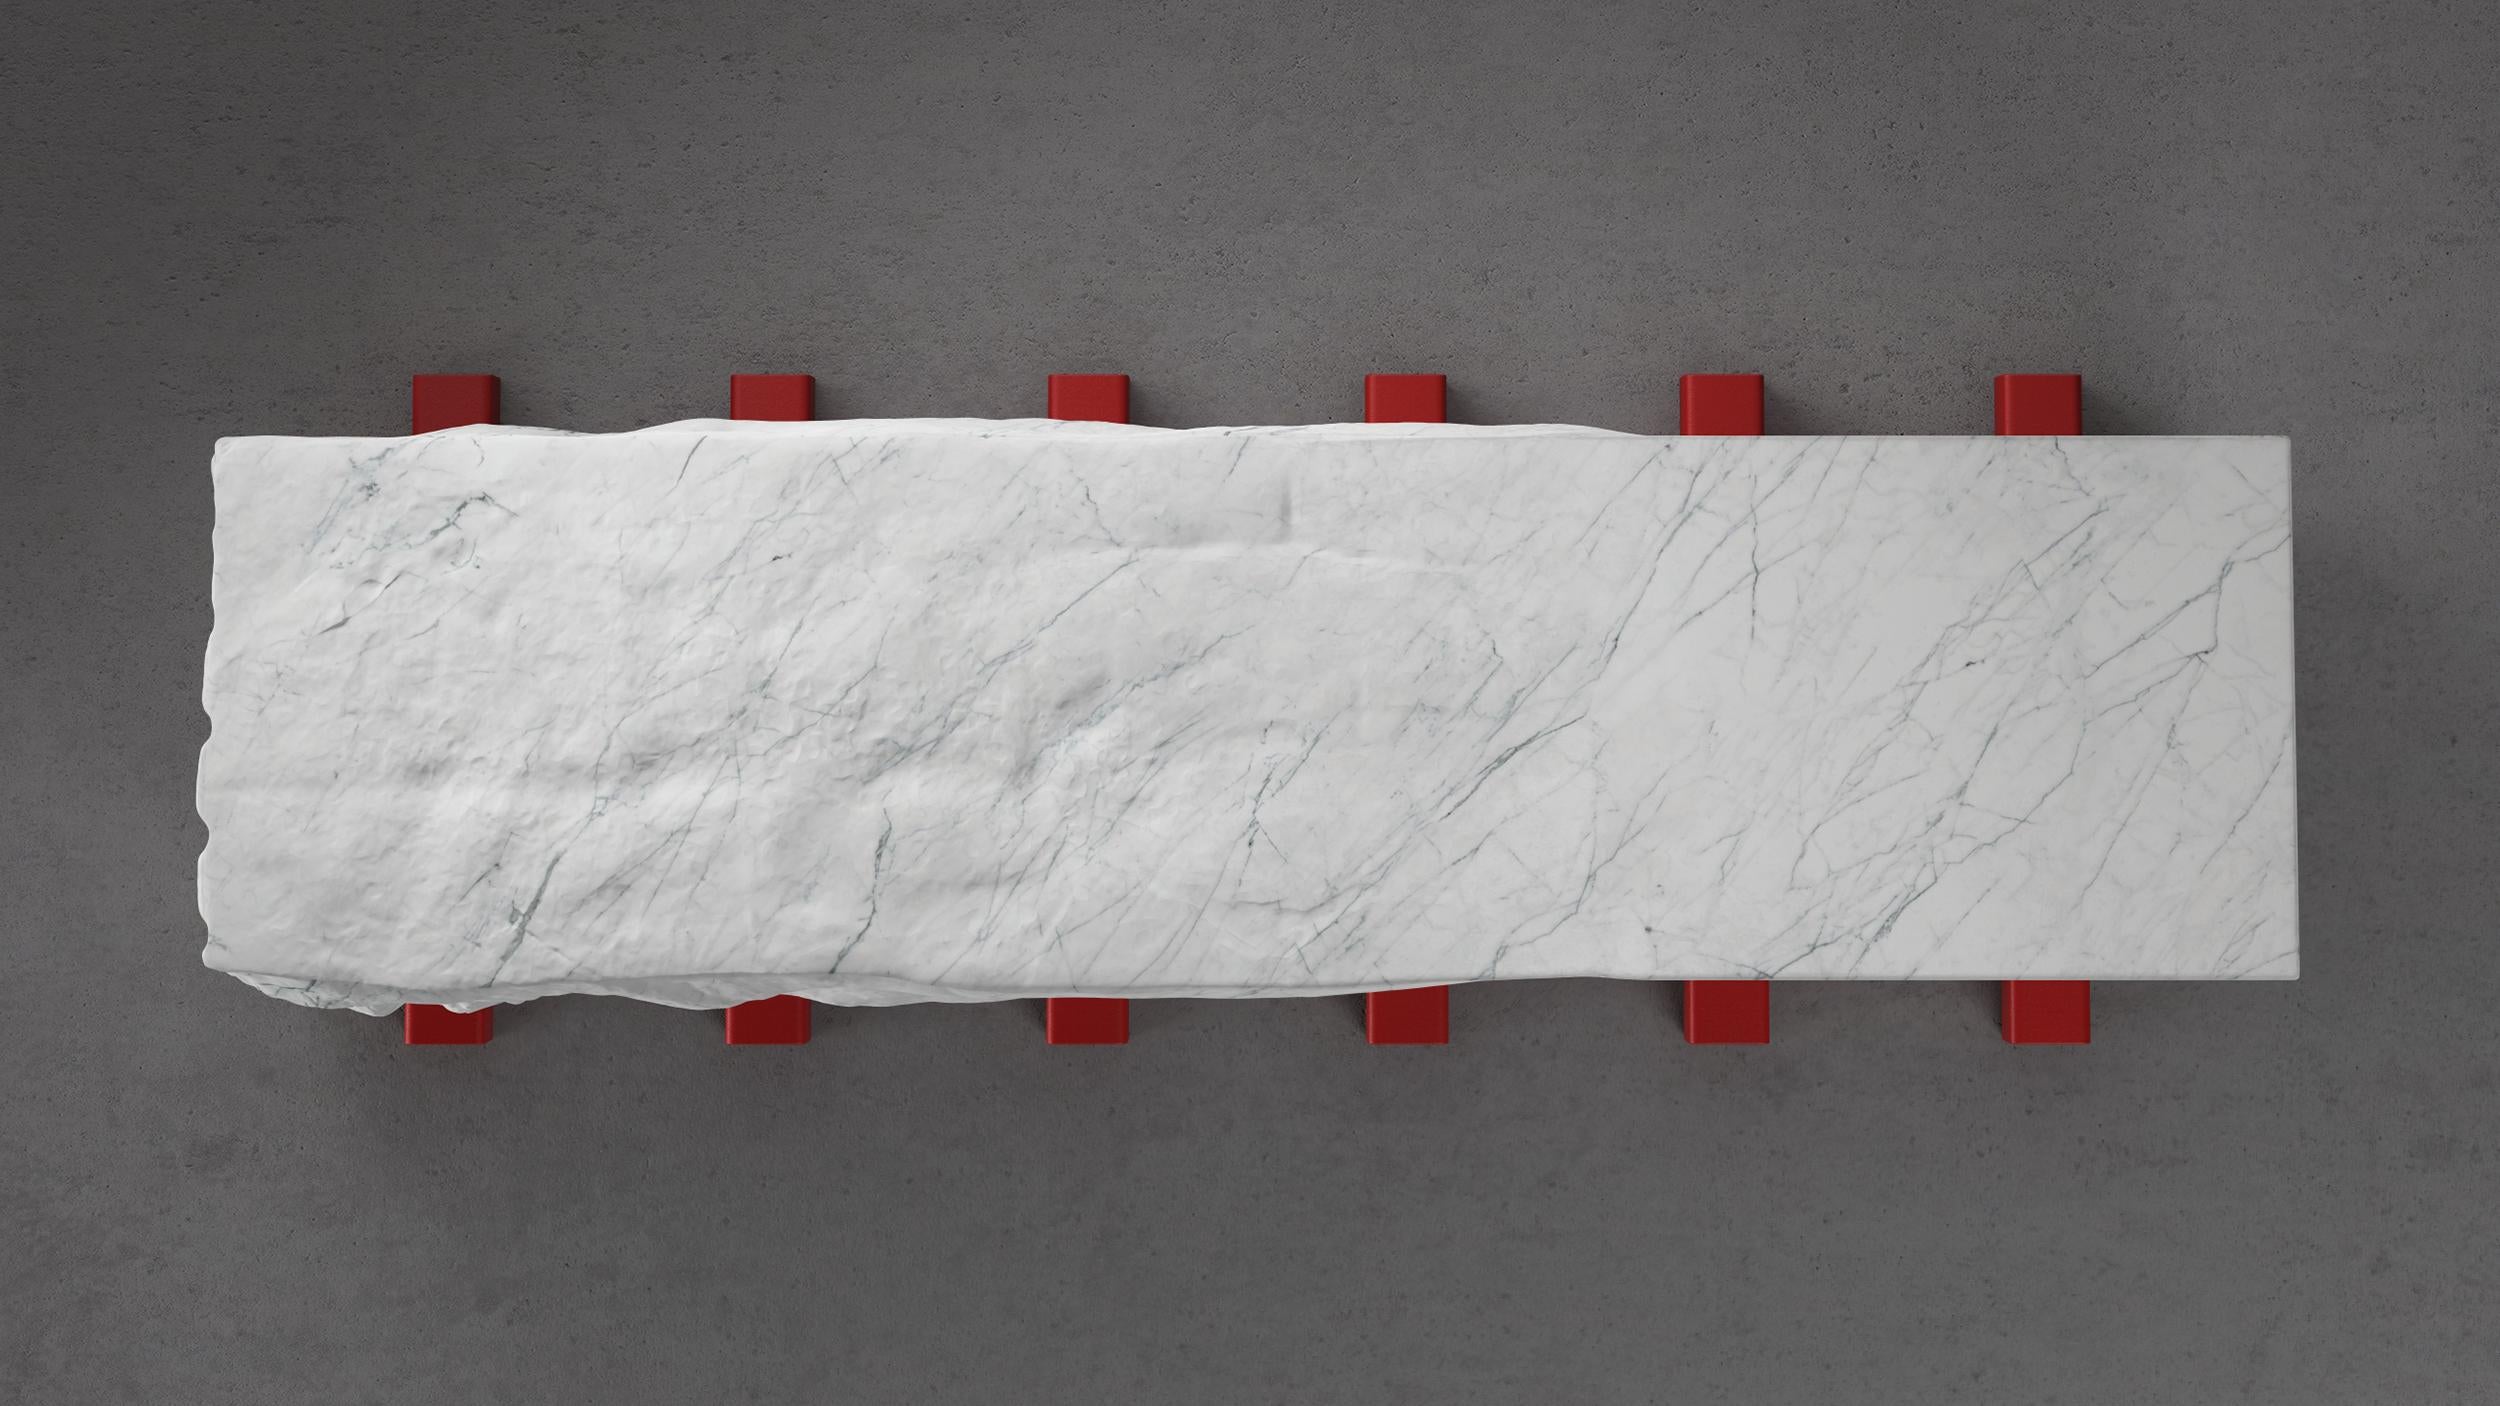 Serra Pelada Bench by Arthur Vallin
Limited 12 + 2 A/P
Dimensions: W 60 x D 20.5 x H 16.5 inch
Materials: Statuario Marble, Steel, Brass
Finishing: Hand sculpted Marble, Epoxy Painted Steel, Textured Brass

Other materials available.

French